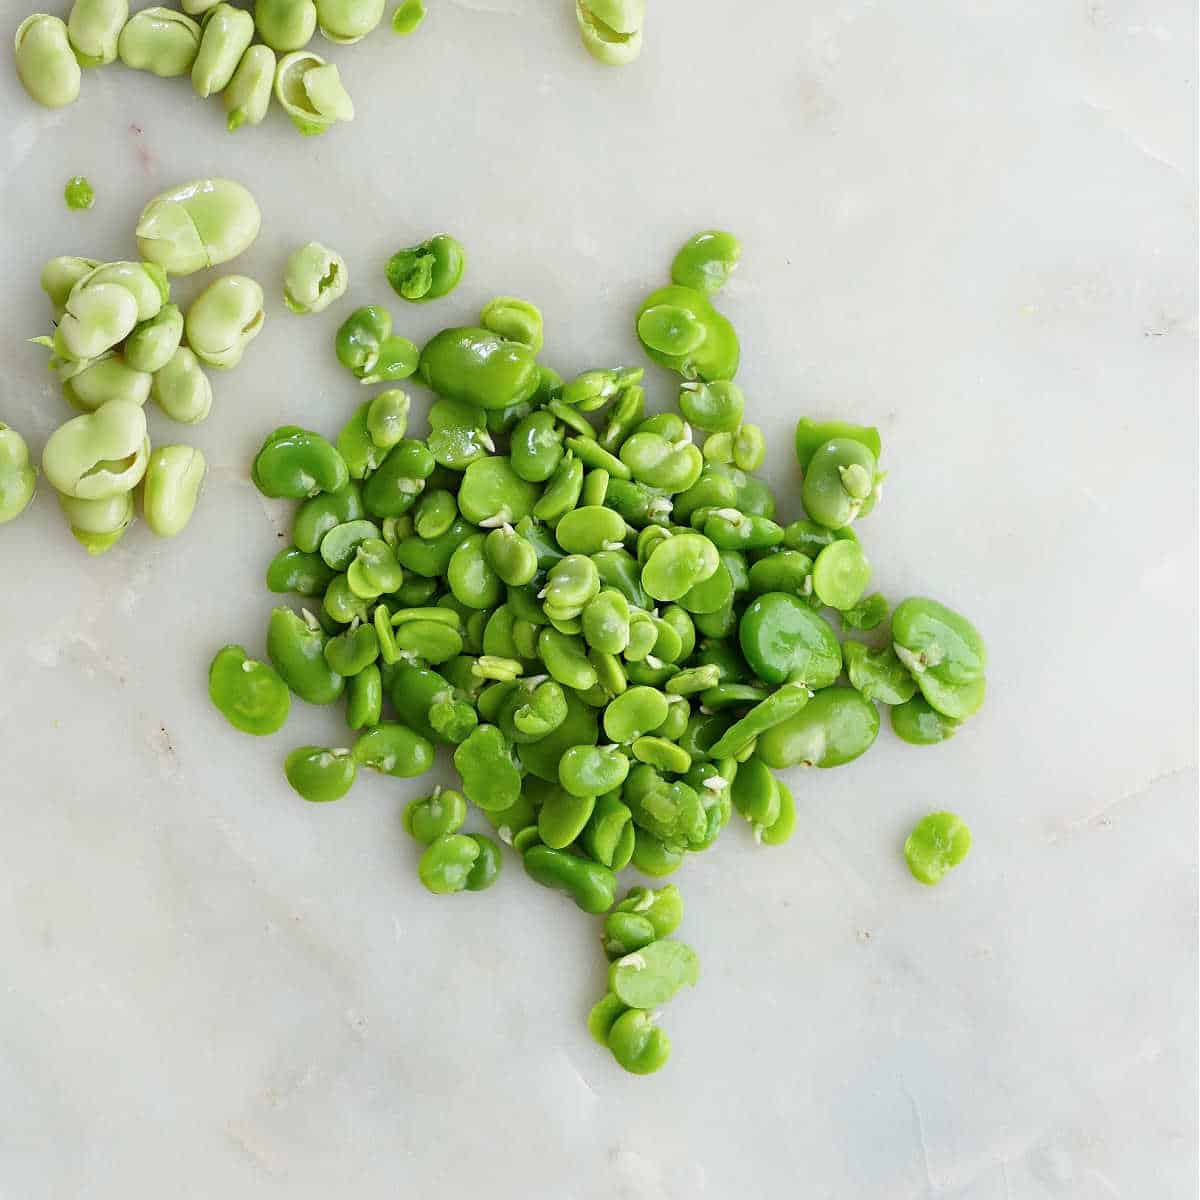 fava beans removed from their skins after being blanched on a counter